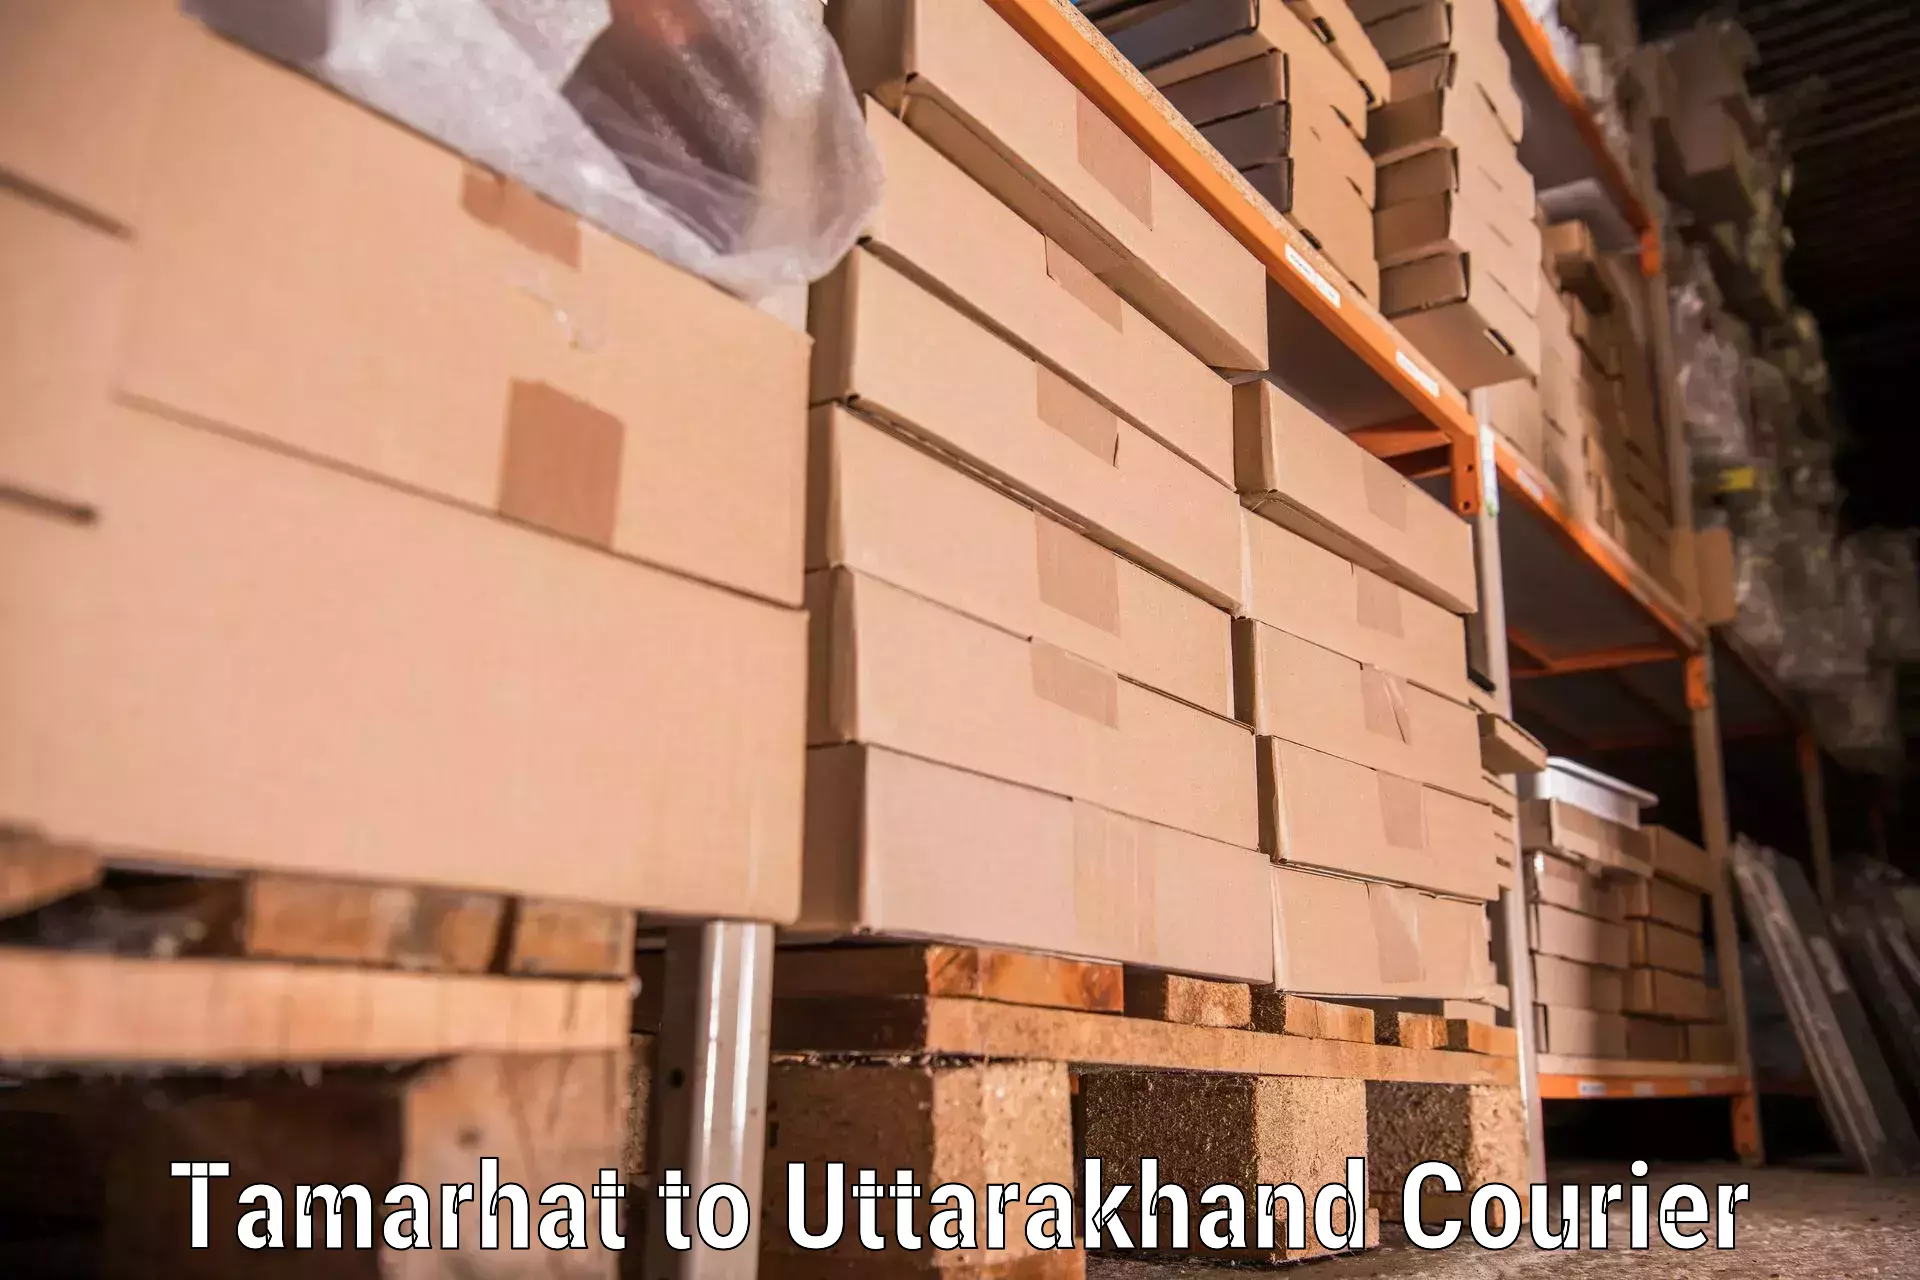 Furniture delivery service Tamarhat to Almora